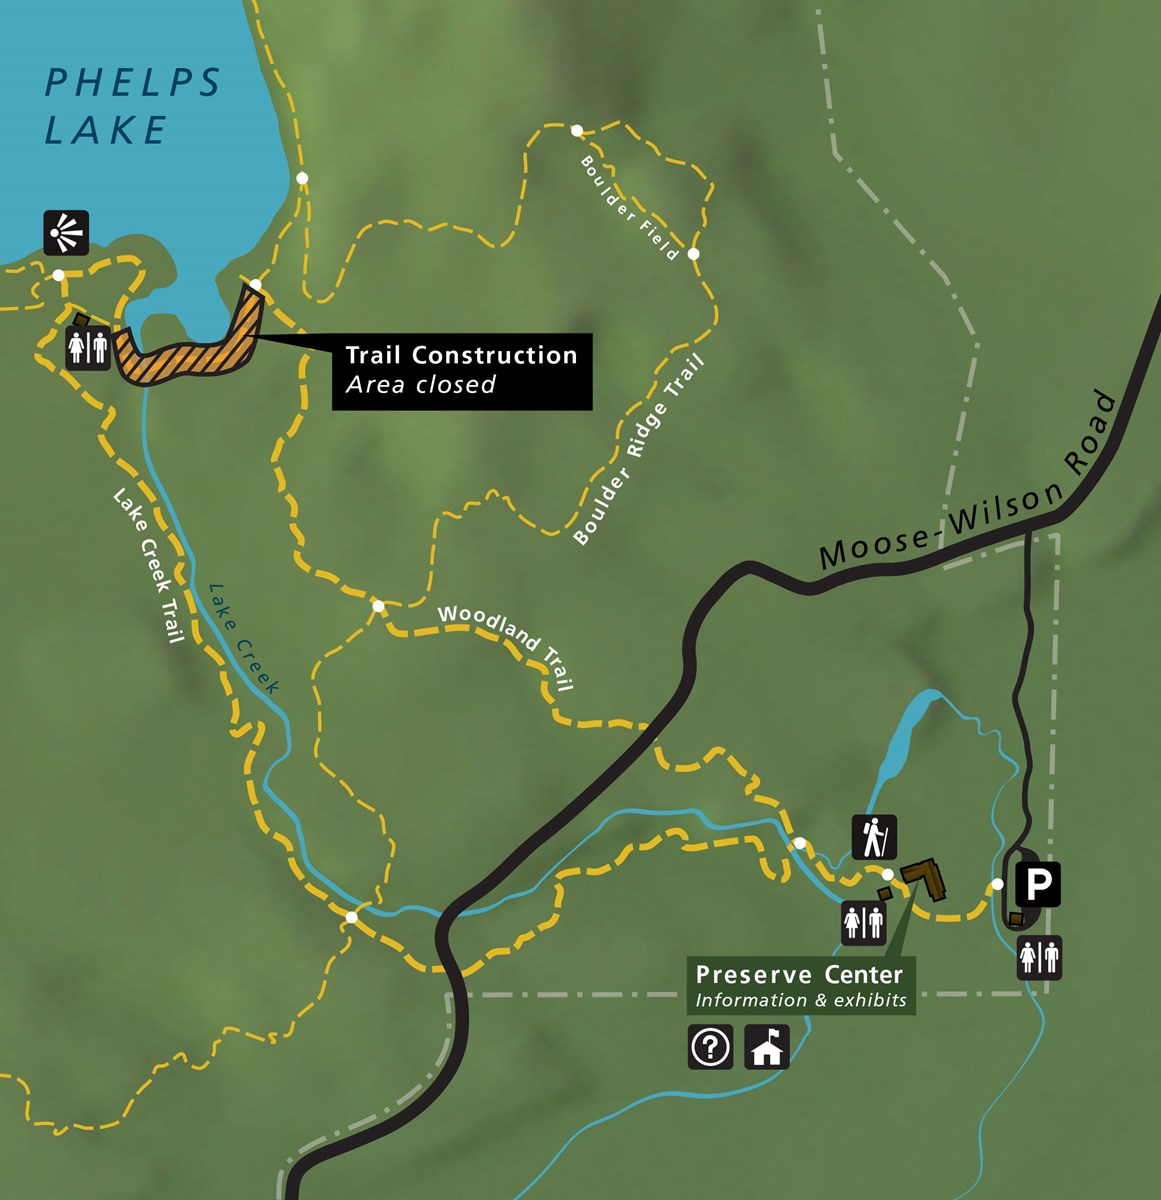 map showing trail closures near Phelps Lake